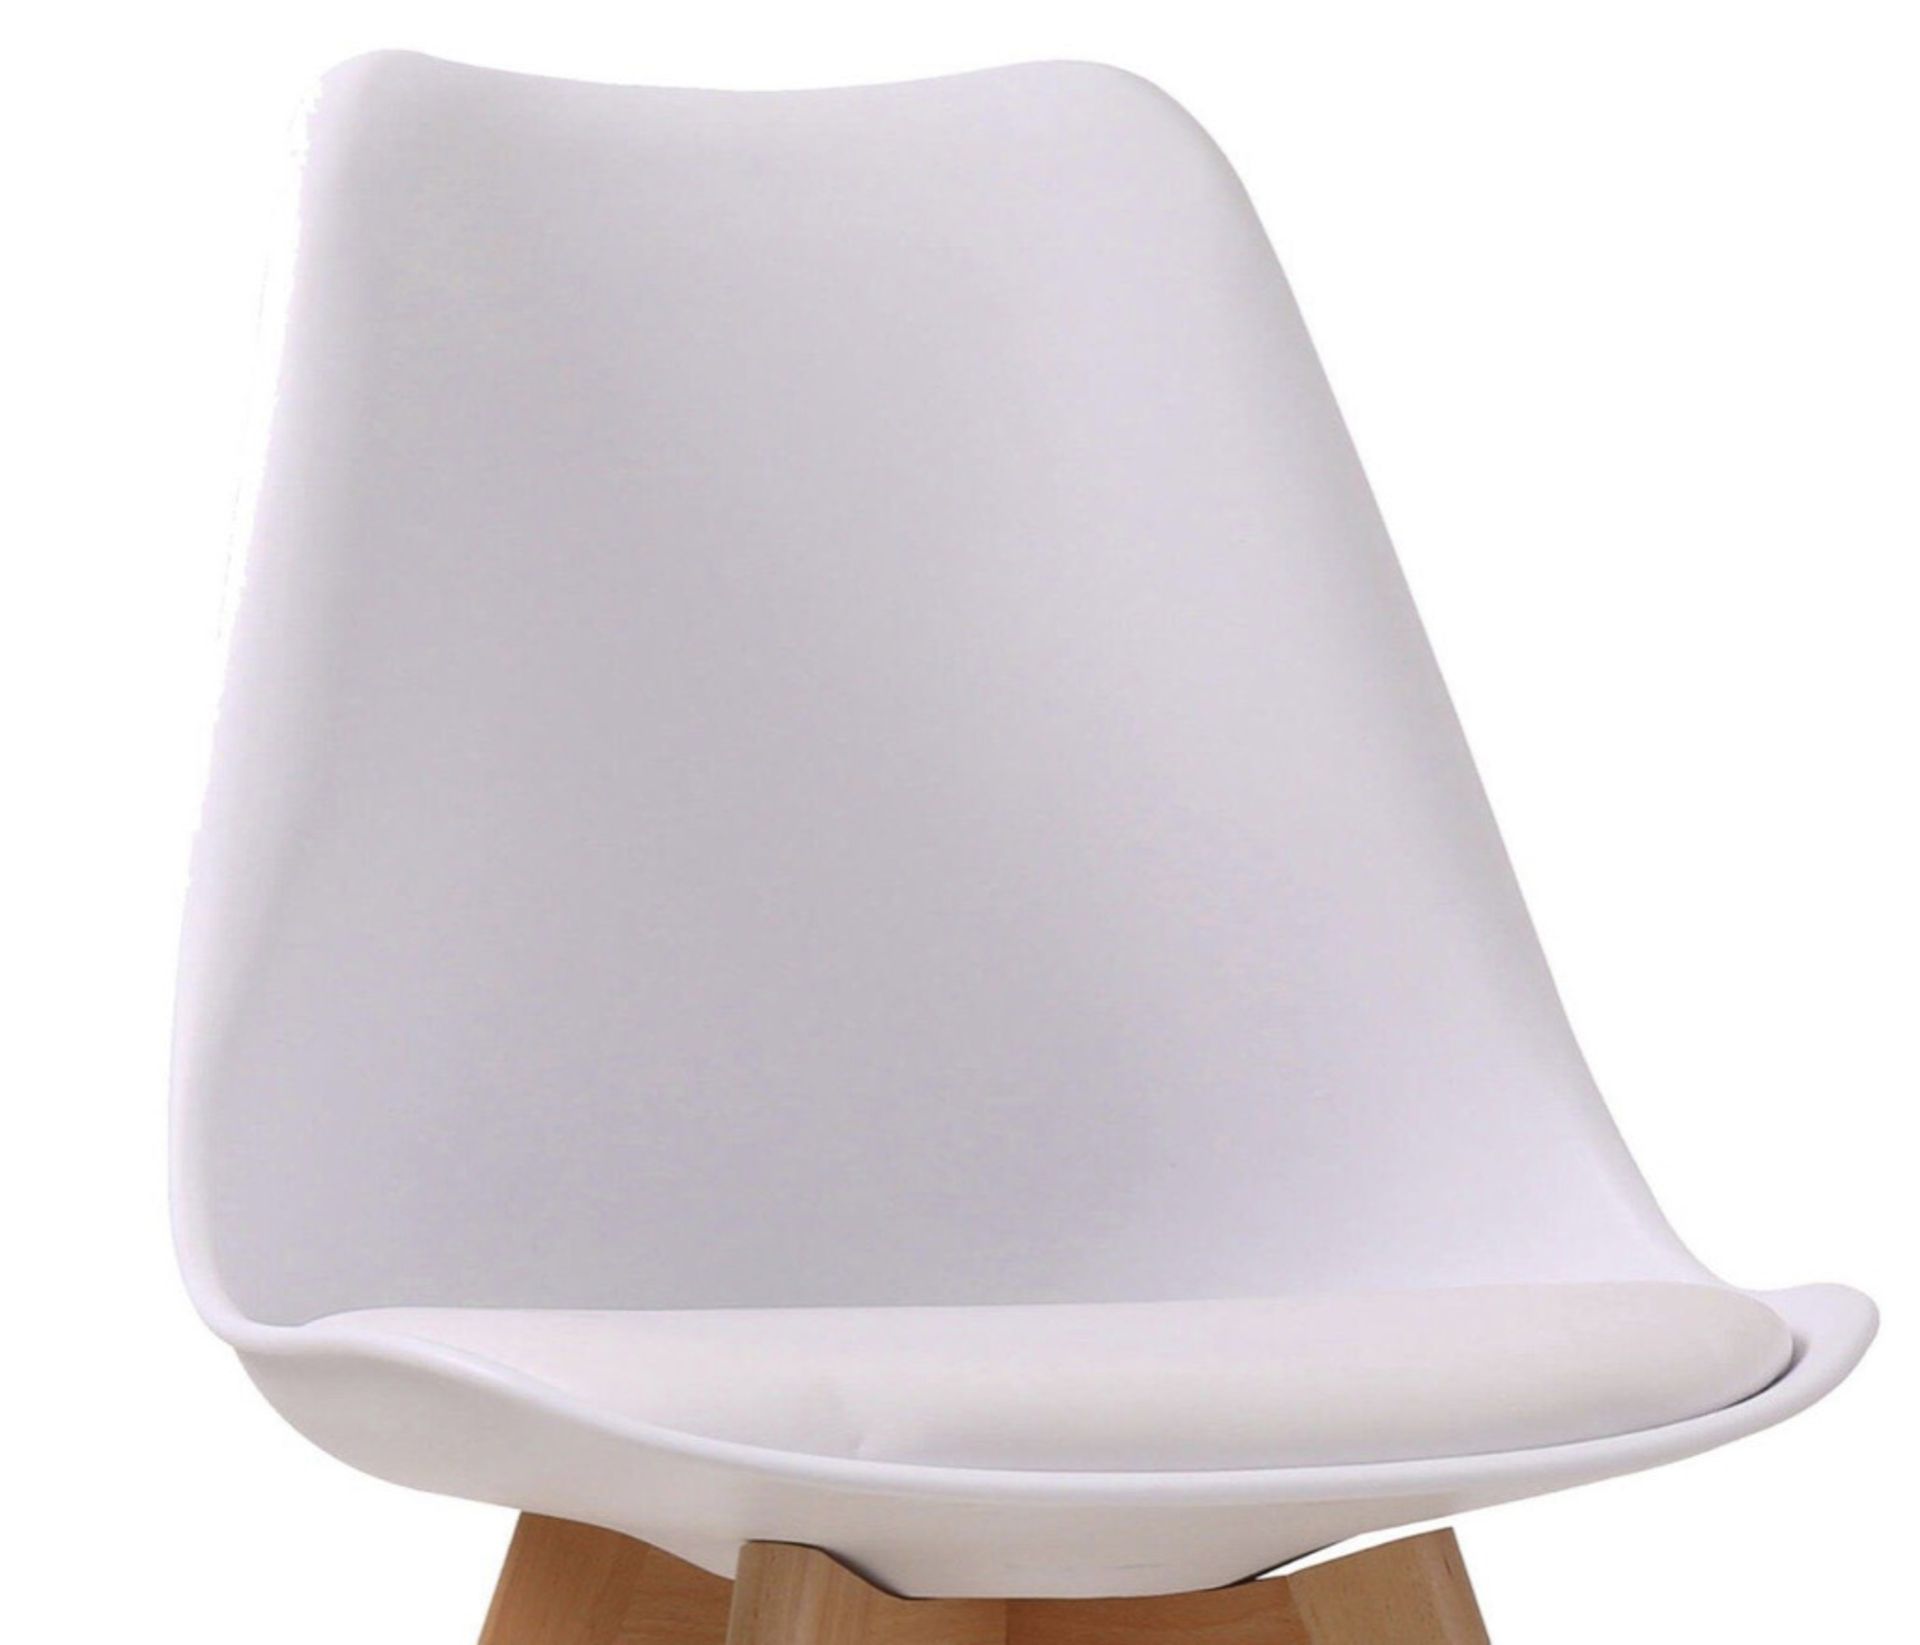 LOUVRE PAIR OF PADDED DINING CHAIRS
IN WHITE - RRP £179 PER PAIR - Image 3 of 3